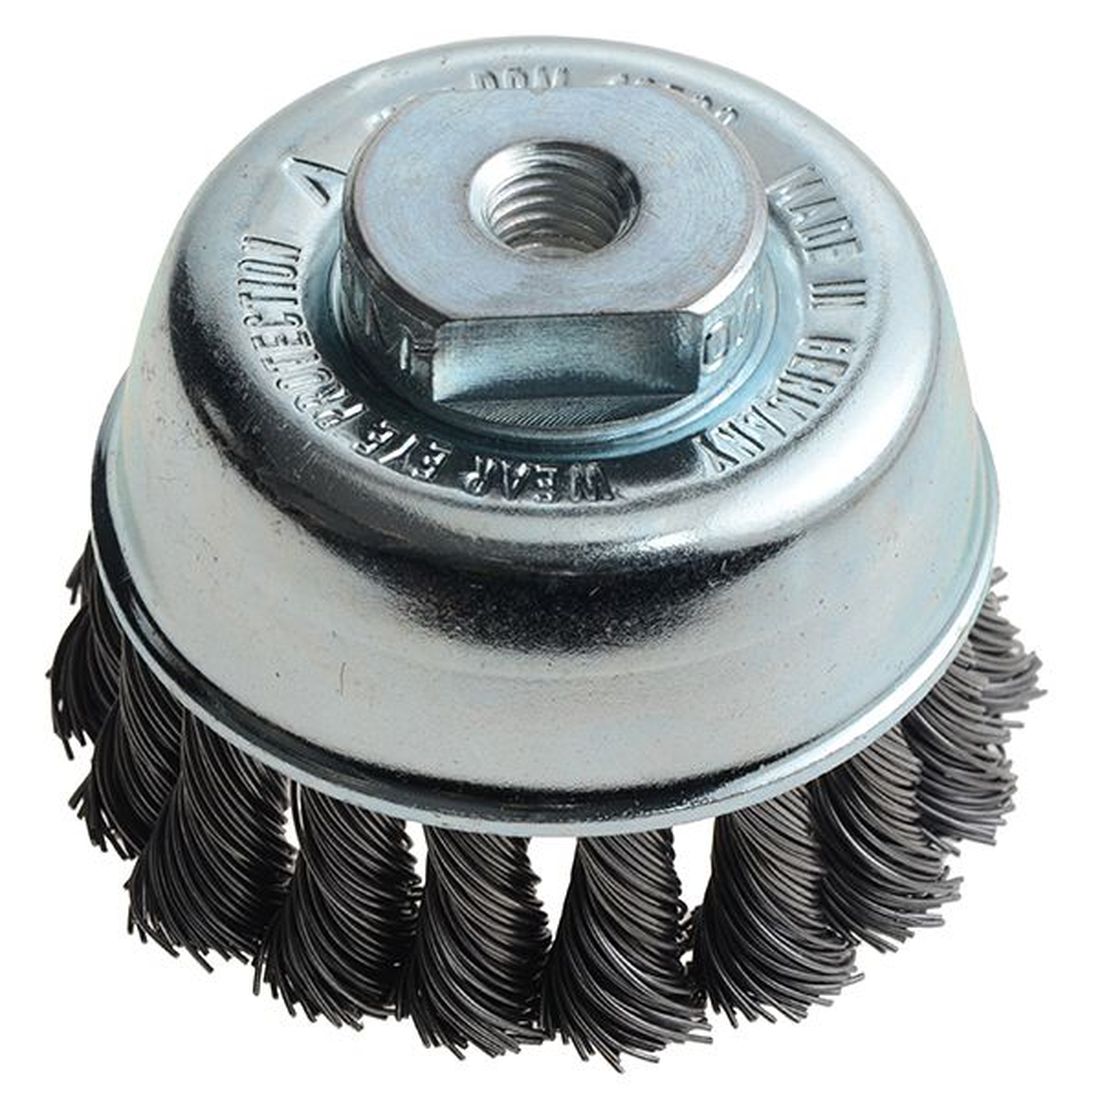 Lessmann Knot Cup Brush 65mm M10x2.0, 0.50 Steel Wire                                    